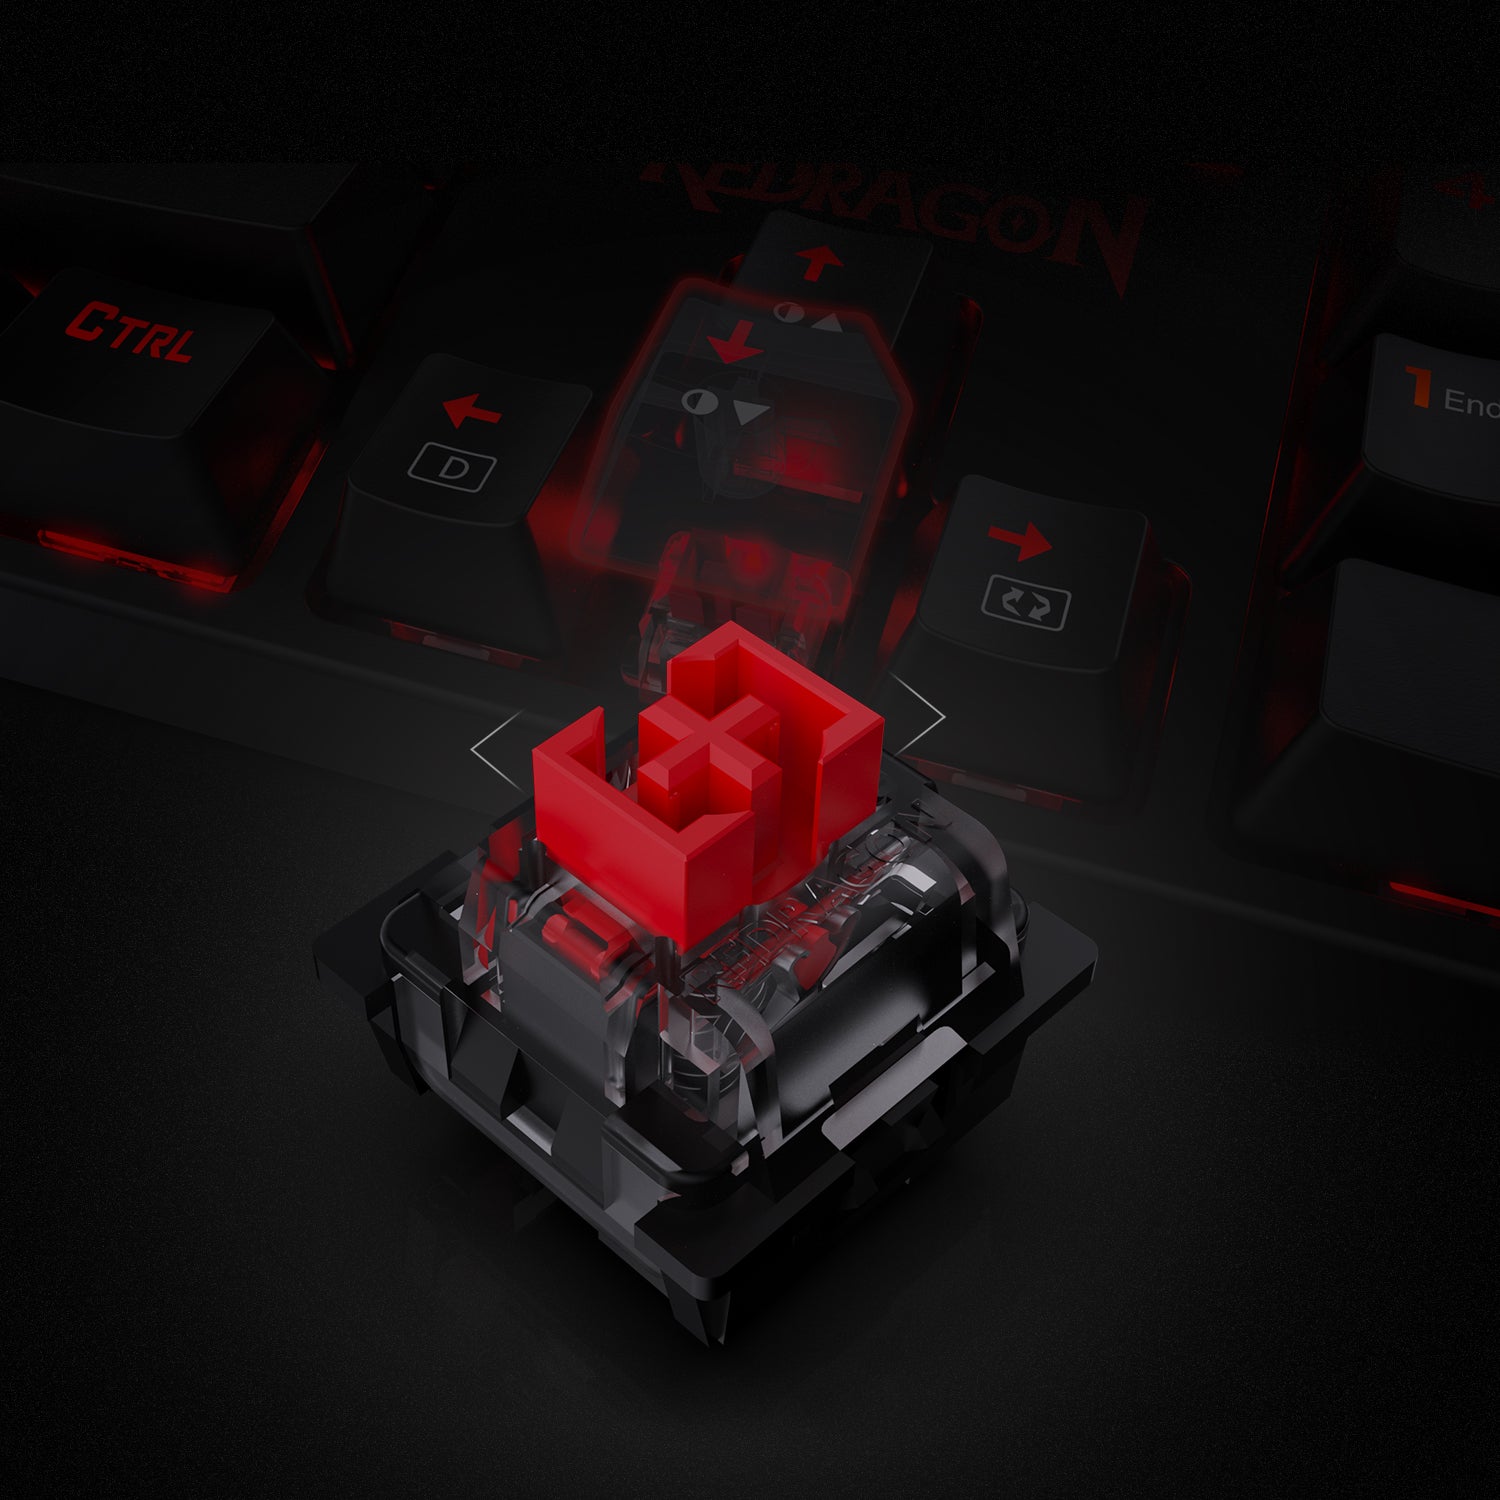 Mechanical Keyboard with Ergonomic Design and Fast Actuation